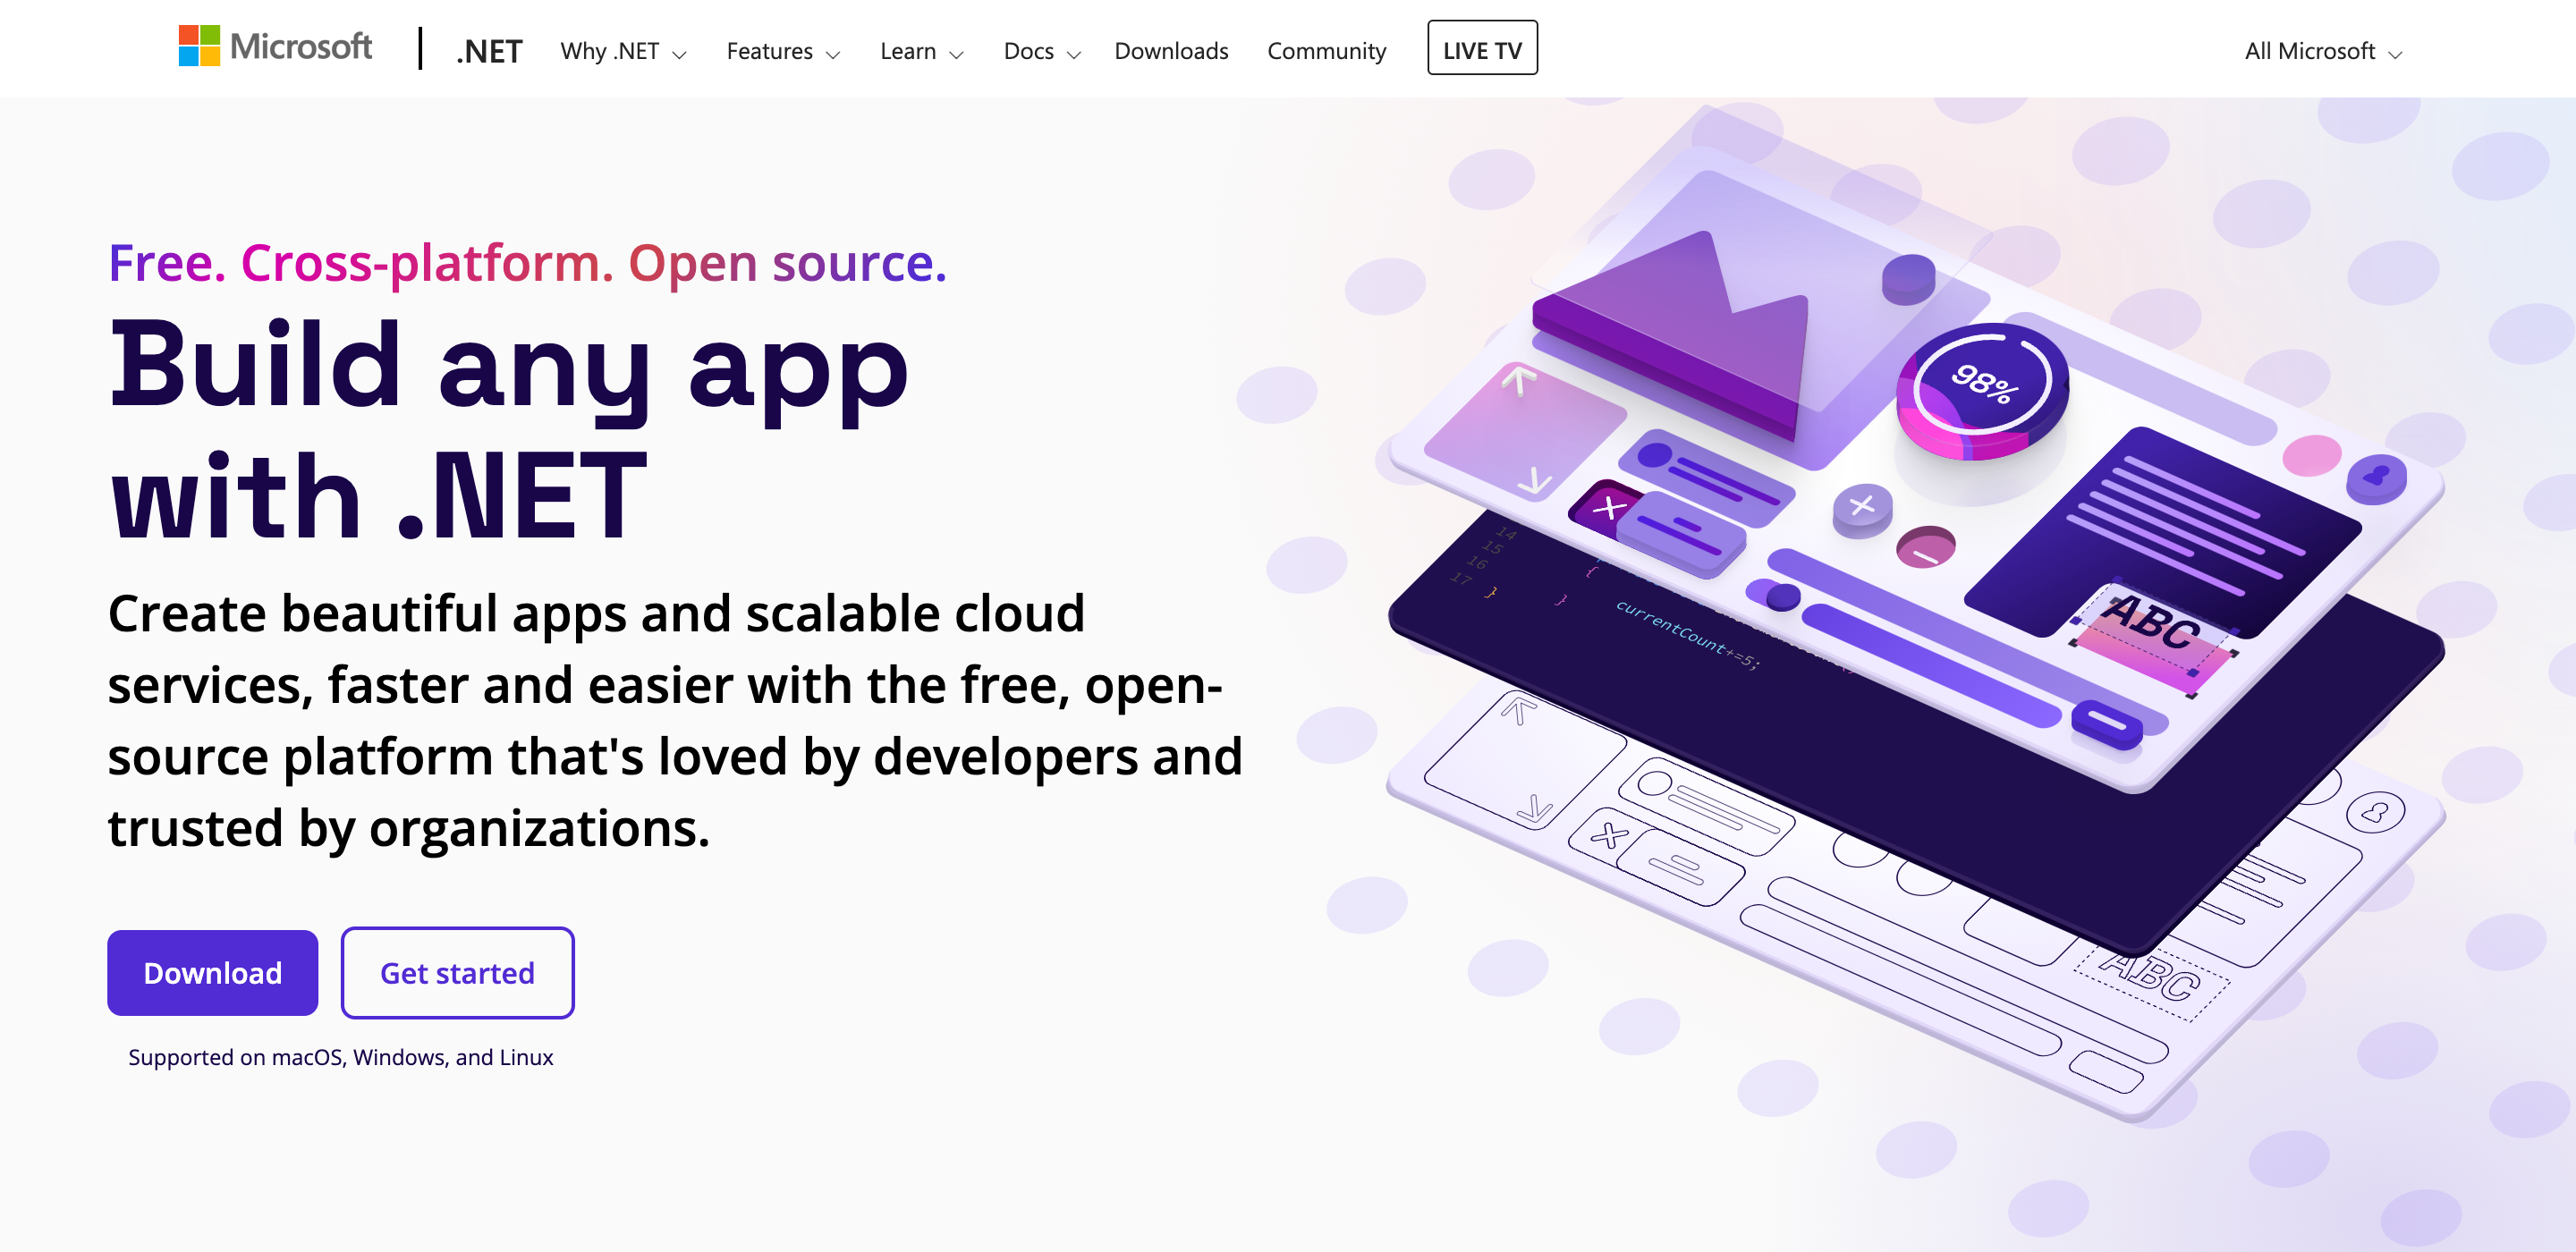 Screenshot of the .NET website hero. To the right is an illustration of something that looks like an "application" split into different layers, all in purple and pink colors. To the left is a headline saying "Build any app with.NET" and eyebrow text above saying "Free. Cross-platform. Open source." Below is a paragraph describing .NET with two buttons: "Download" and "Get started."